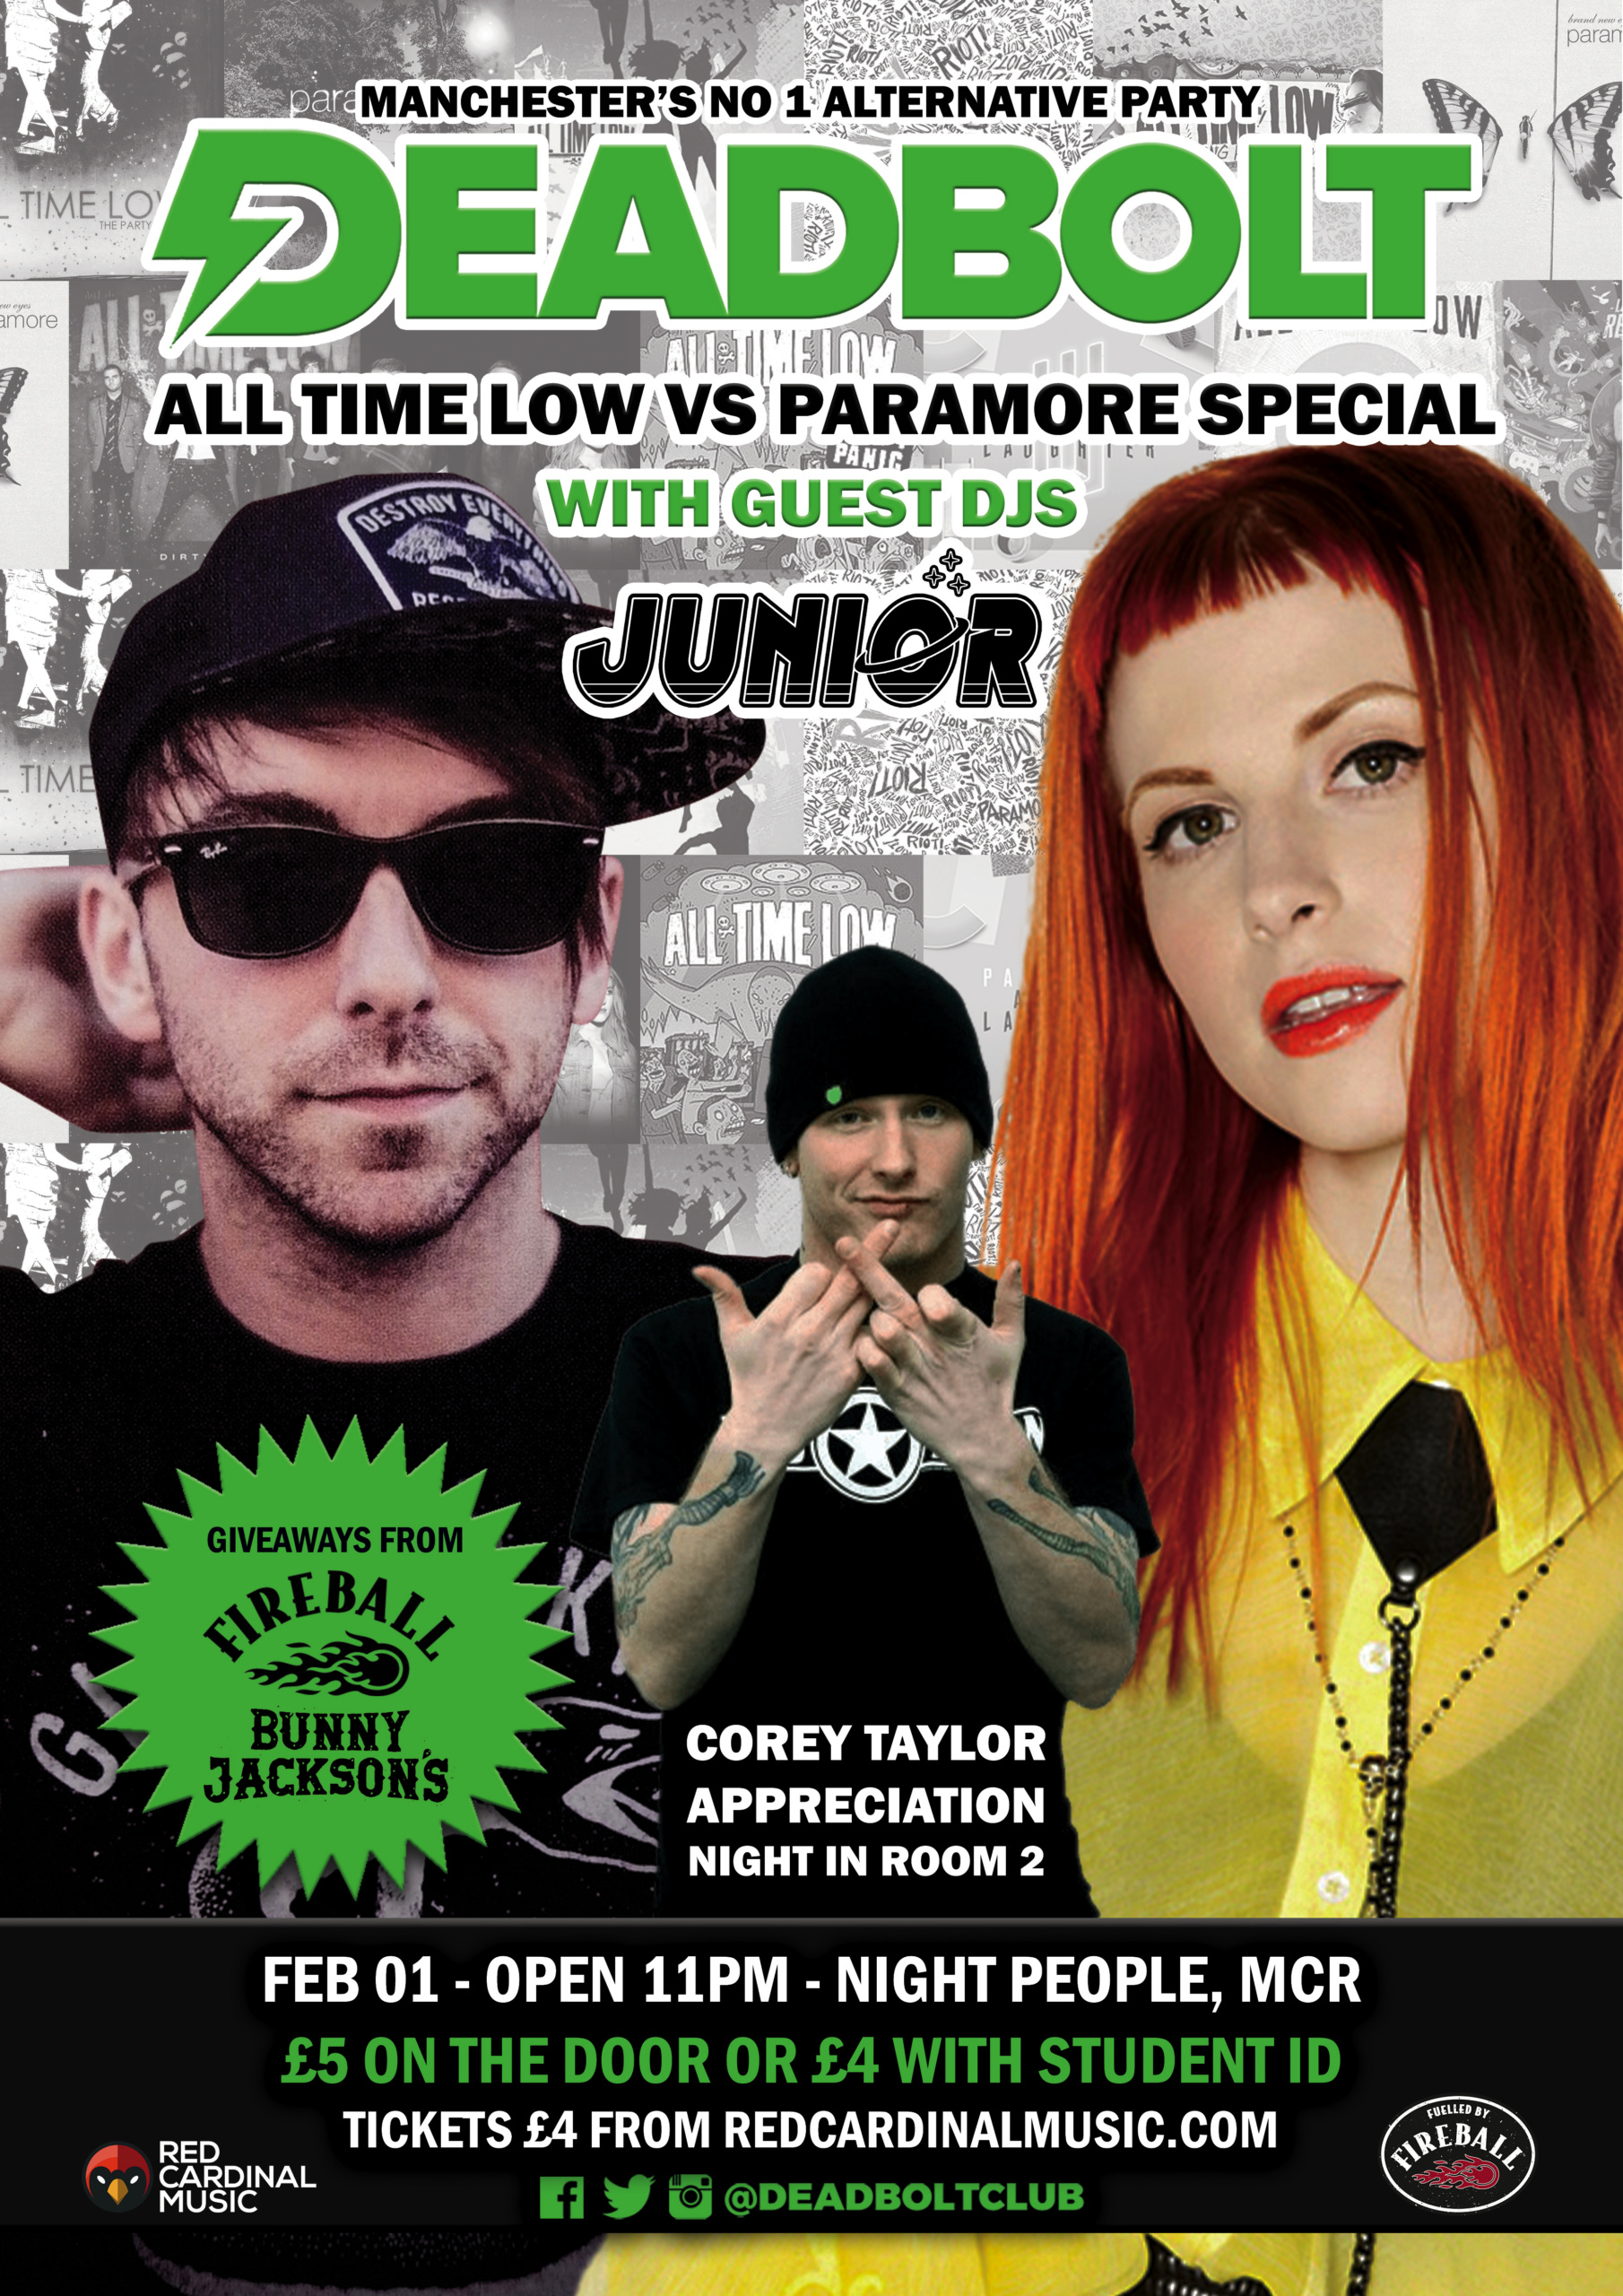 Deadbolt Manchester - All Time Low vs Paramore ft Junior - Feb 20 - Poster - Red Cardinal Music